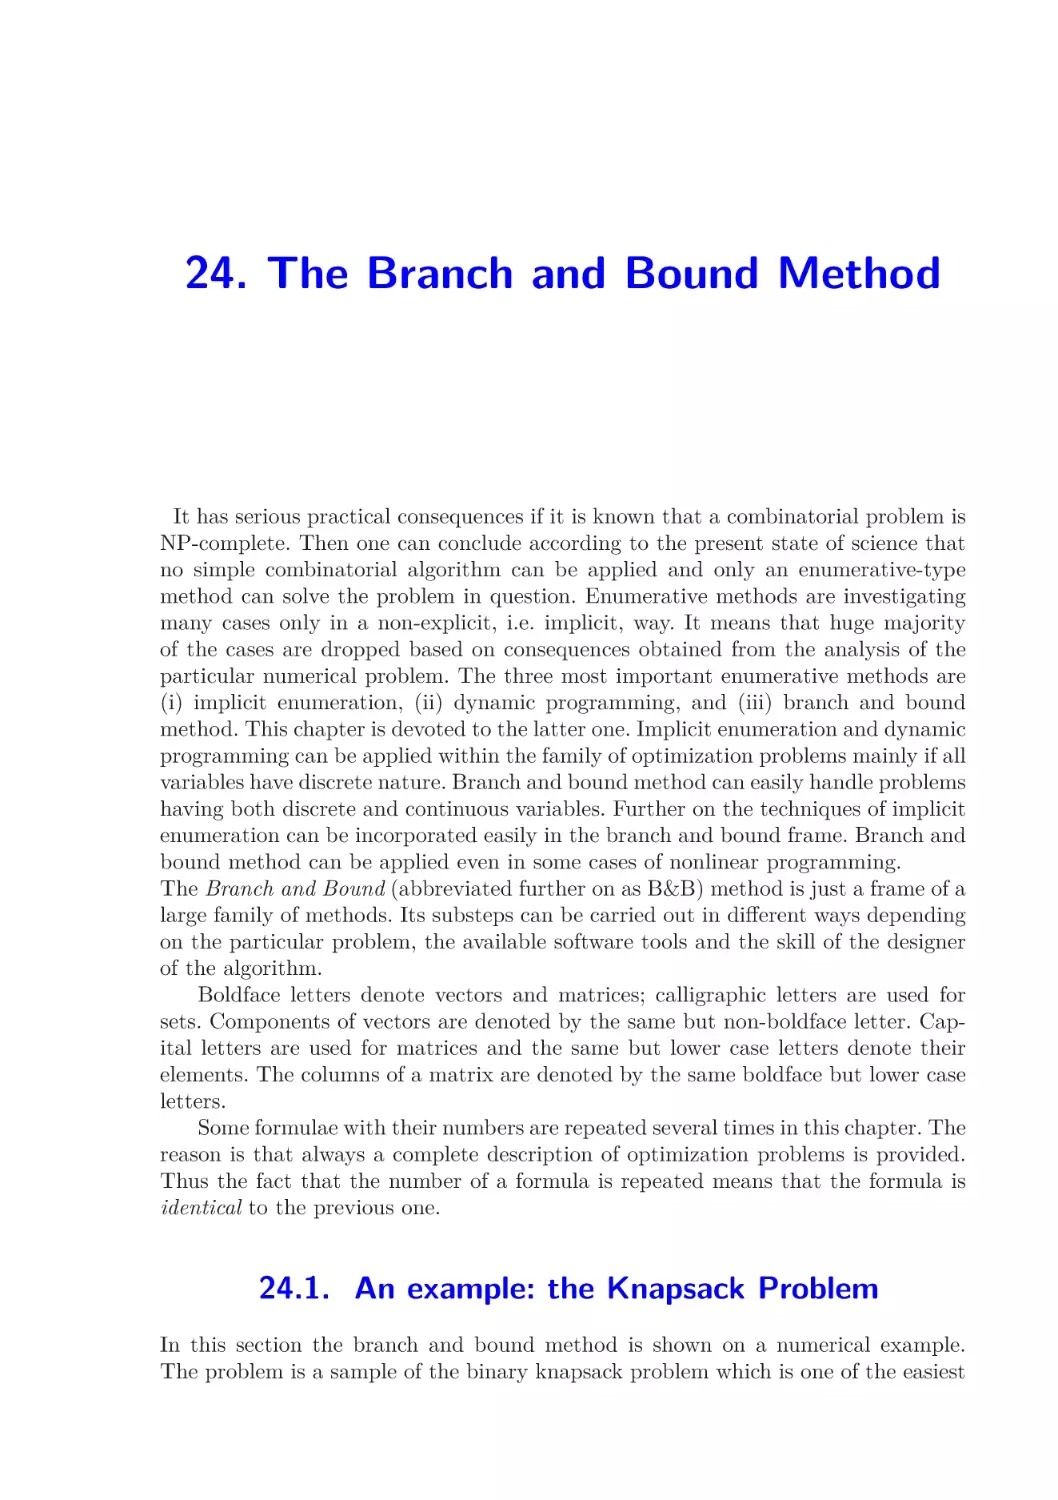 24. The Branch and Bound Method
24.1.  An example